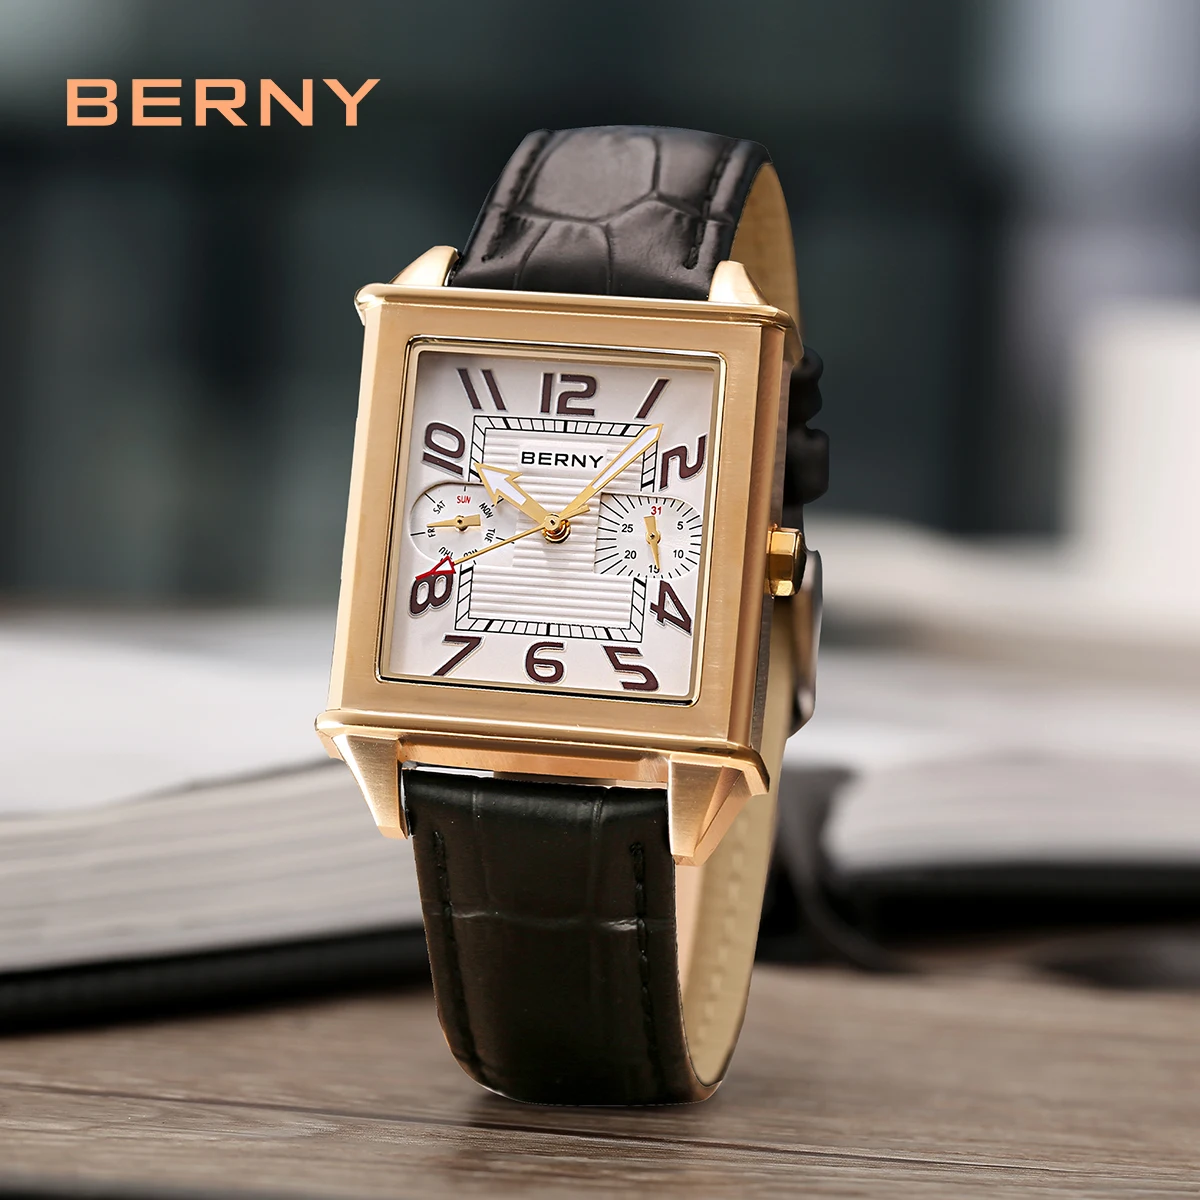 BERNY Quartz Watch for Men Luxury Watch Male Vintage BERNY 6P25 Day Date Leather 3ATM Waterproof Golden Tank Square Wristwatch knitted cardigan vest coat tank comfortable top daily v neck holiday vacation loose vintage m 3xl male brand new